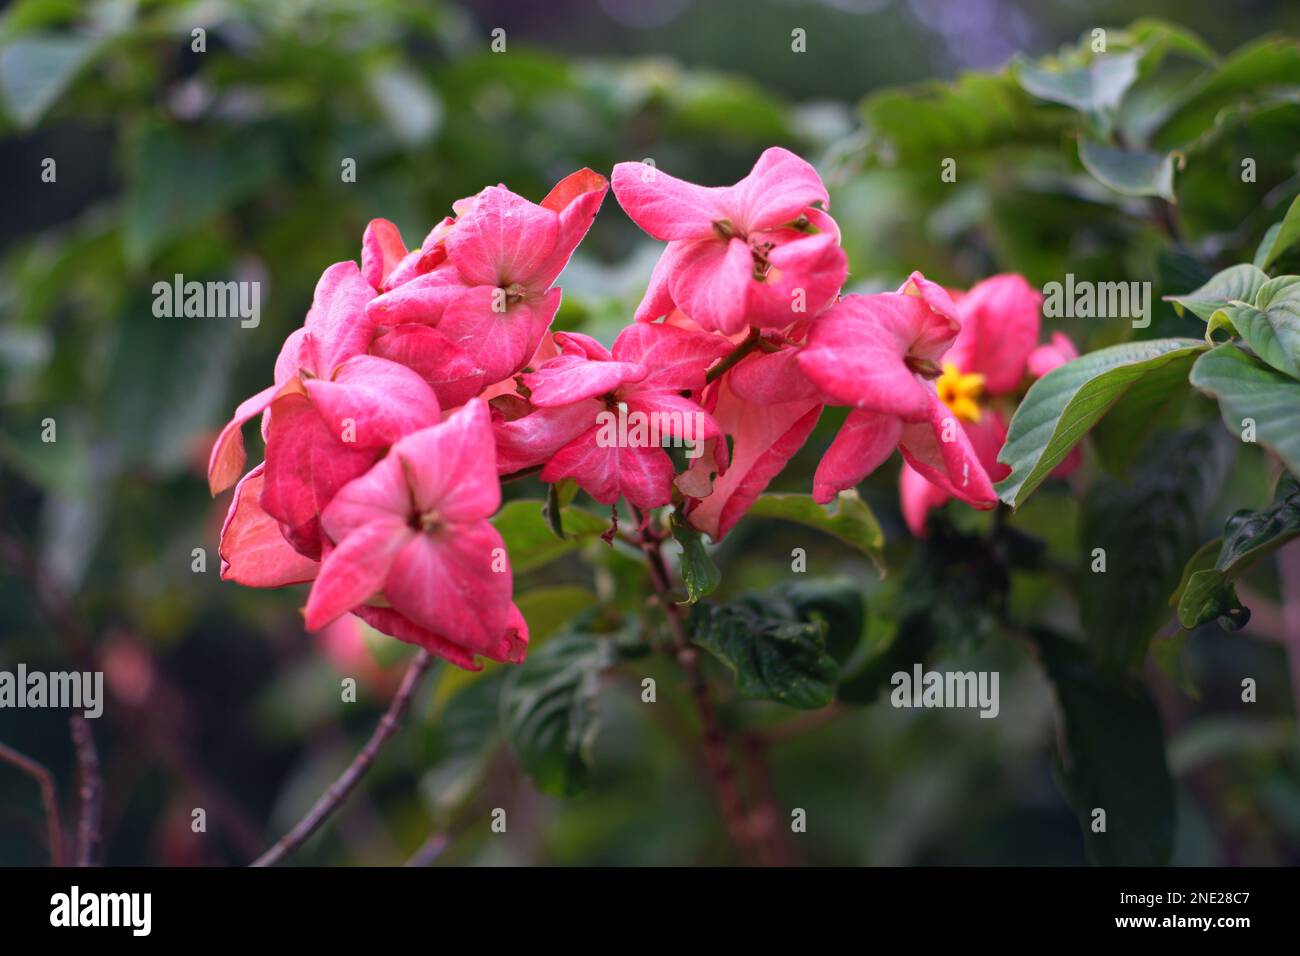 Flowers From The Pink Mussaenda Plant, Which Blooms Pink, In The Village Of Daya Baru In The Afternoon Stock Photo